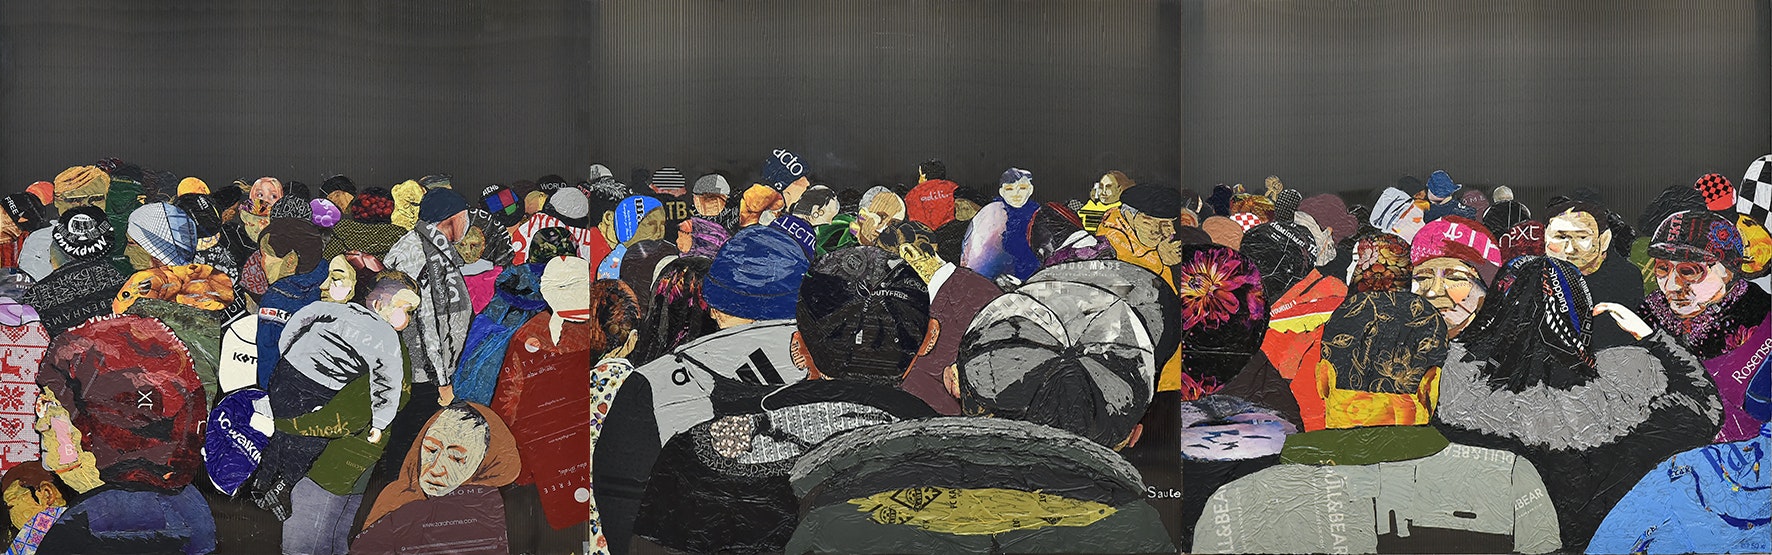 A wide artwork depicting many people in a crowd.